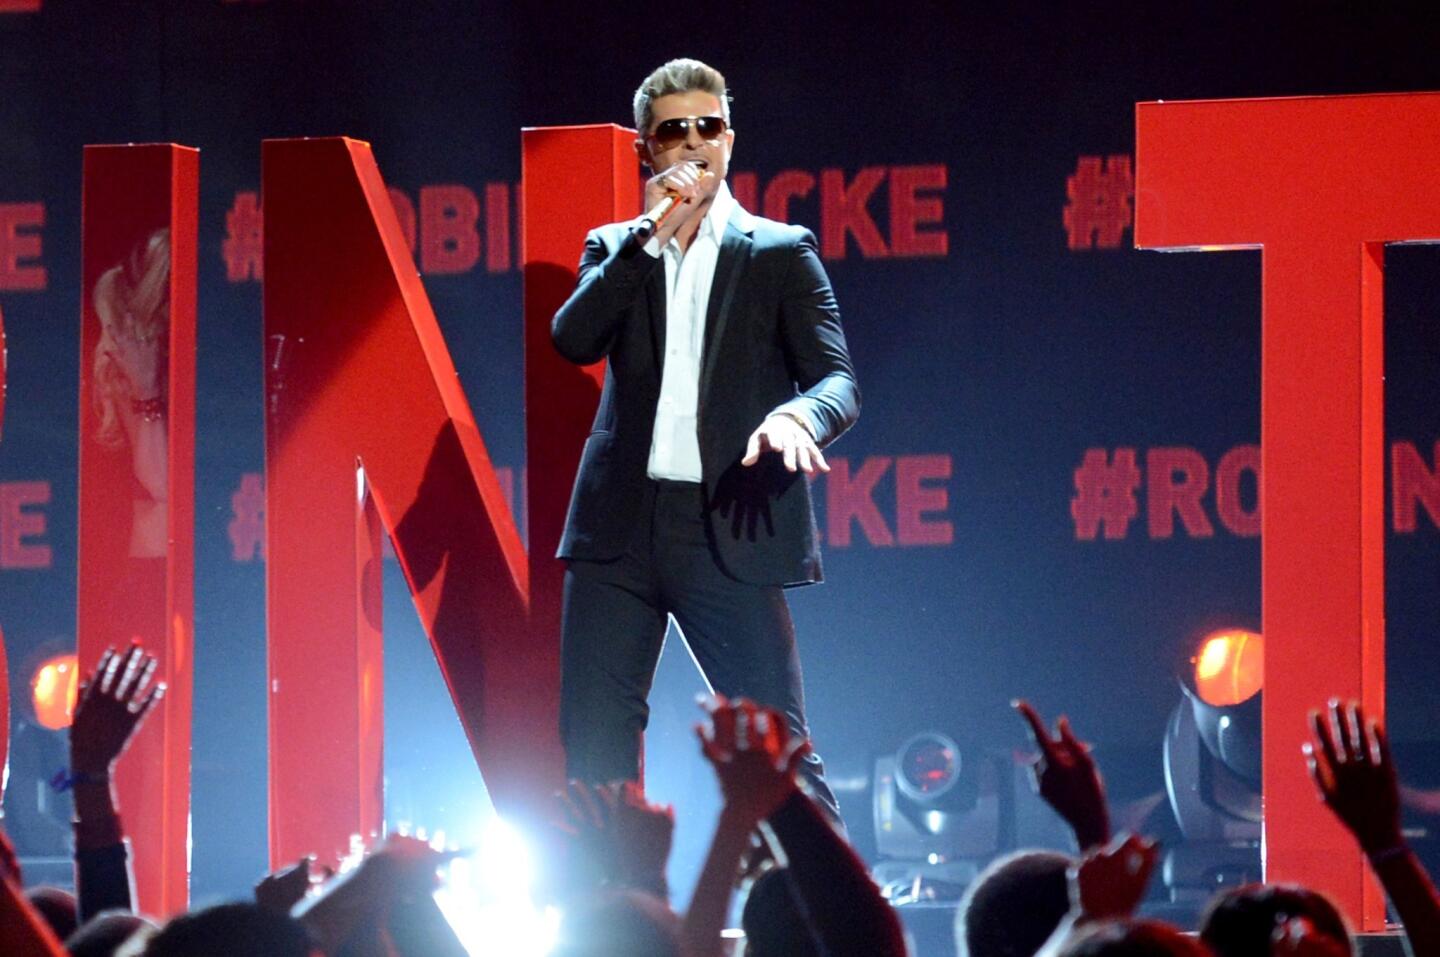 Robin Thicke's 'Blurred Lines' breaks record for highest radio audience